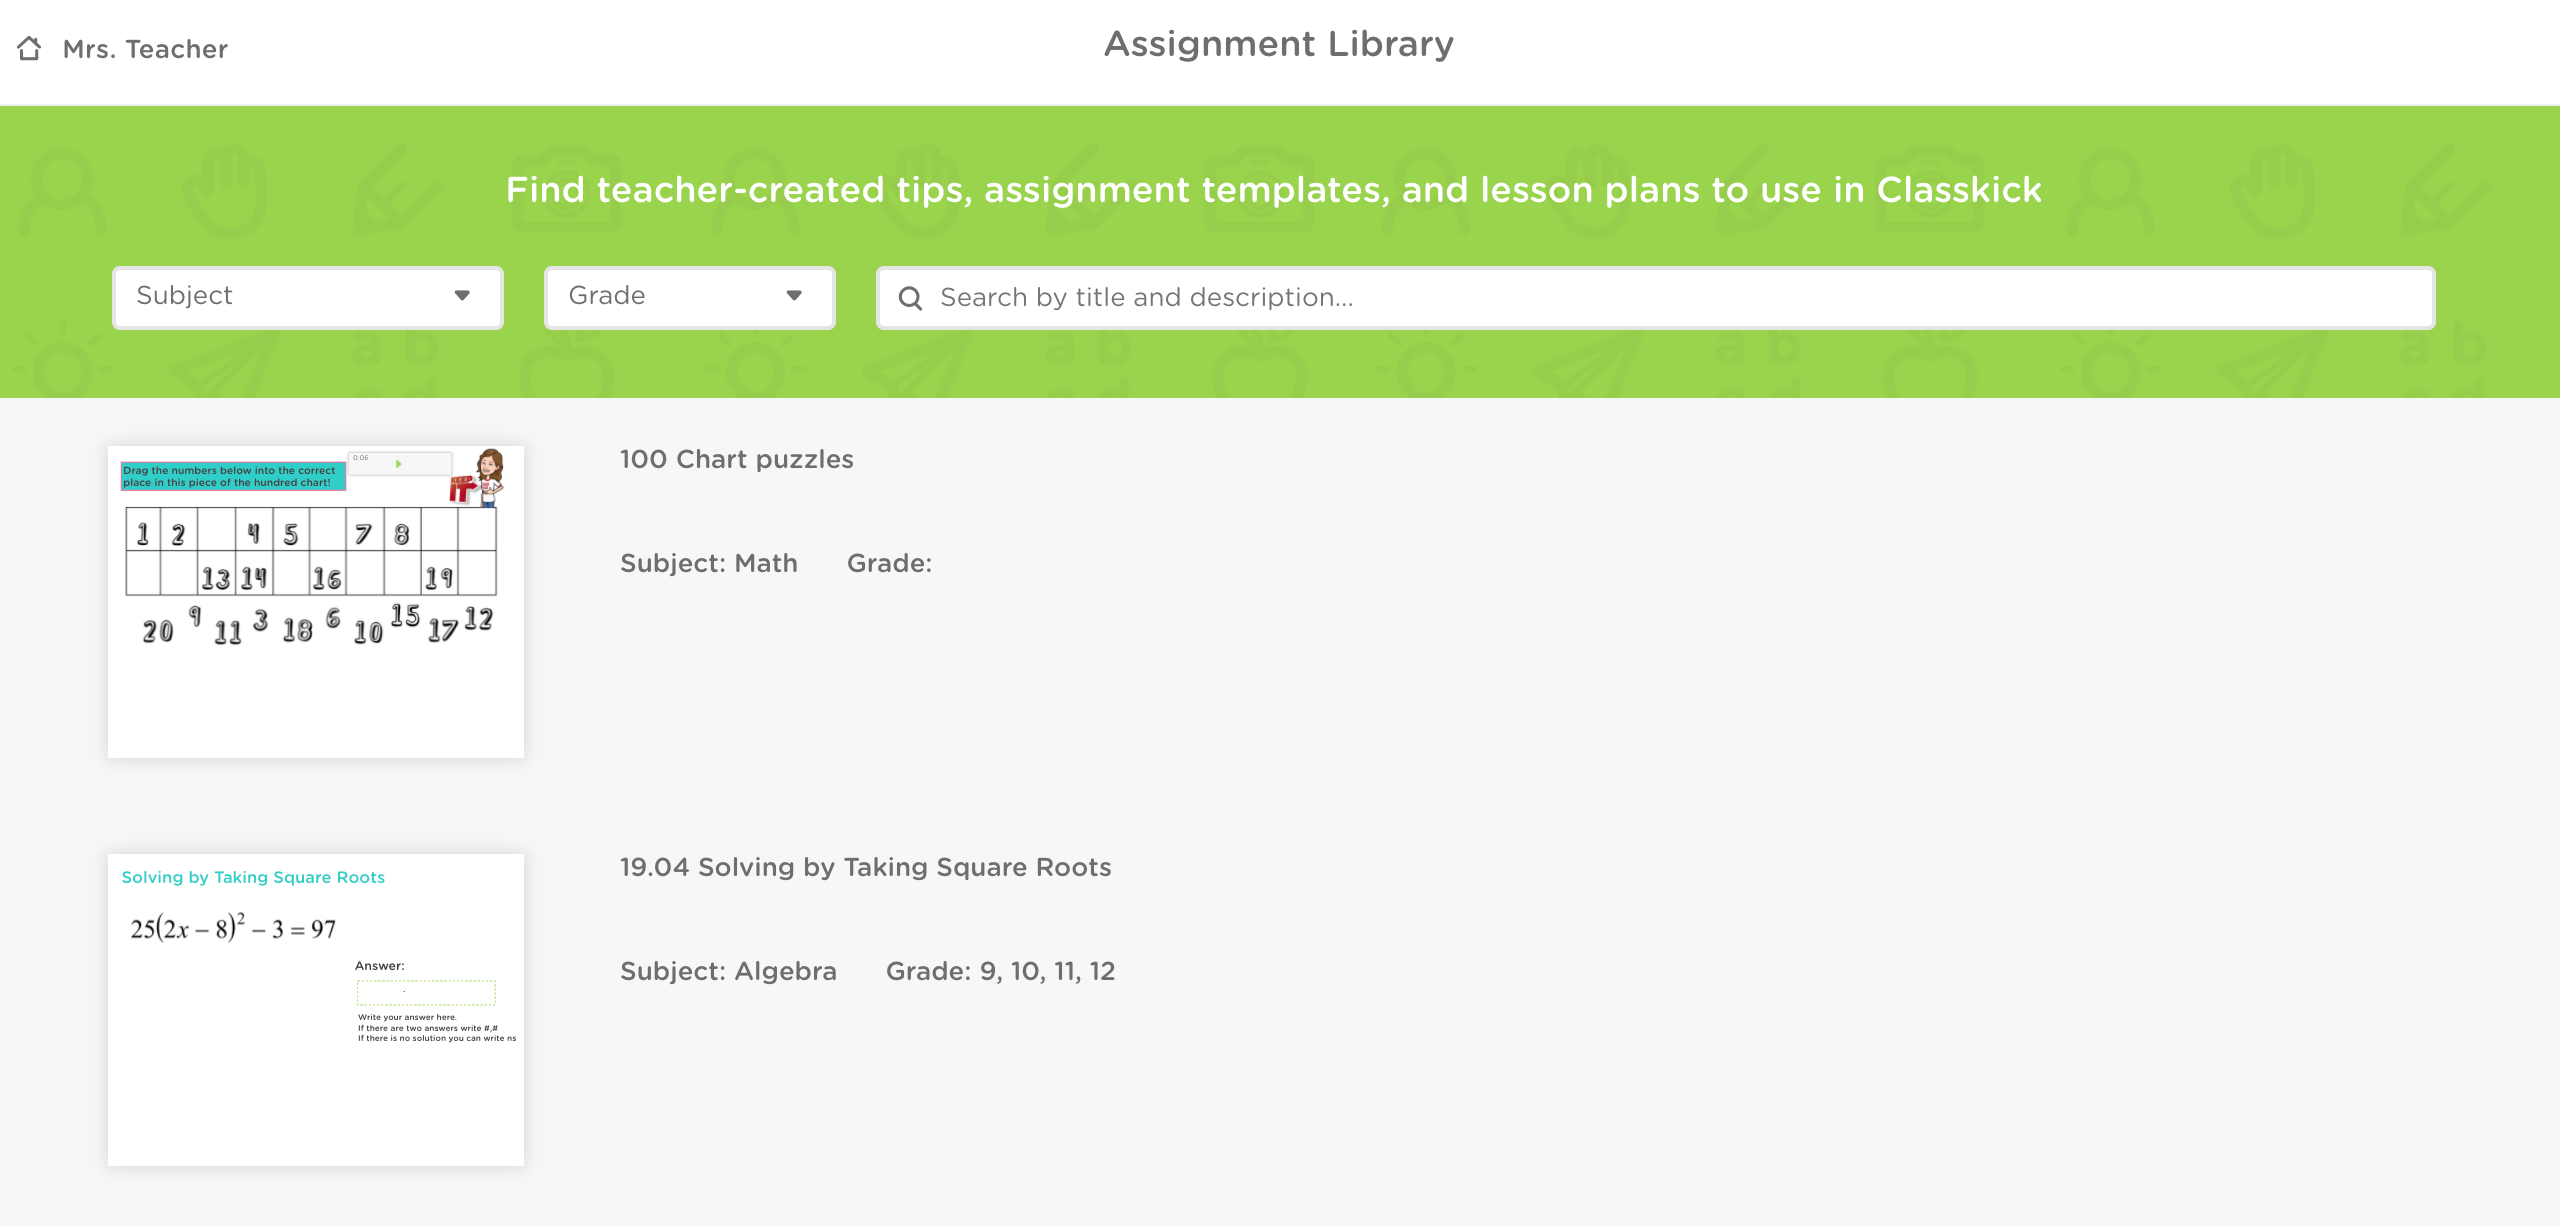 The assignment library page on Classkick.